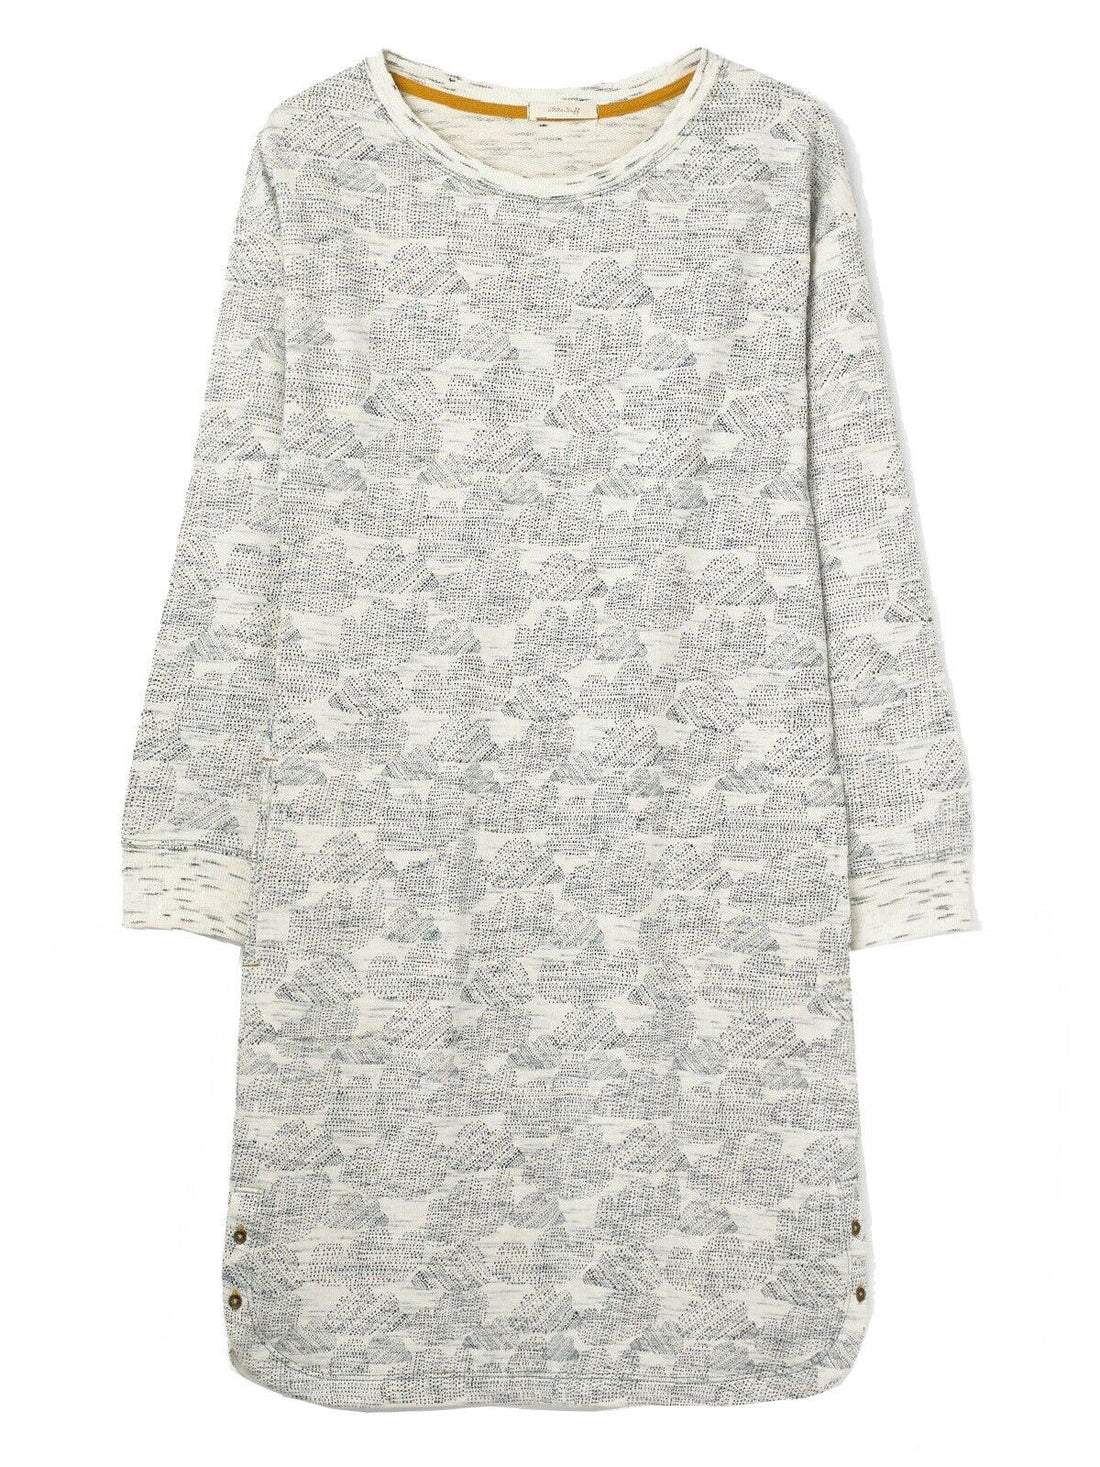 EX WHITE STUFF Grey Cloudy Day Sweater Dress in Size 12 RRP £55